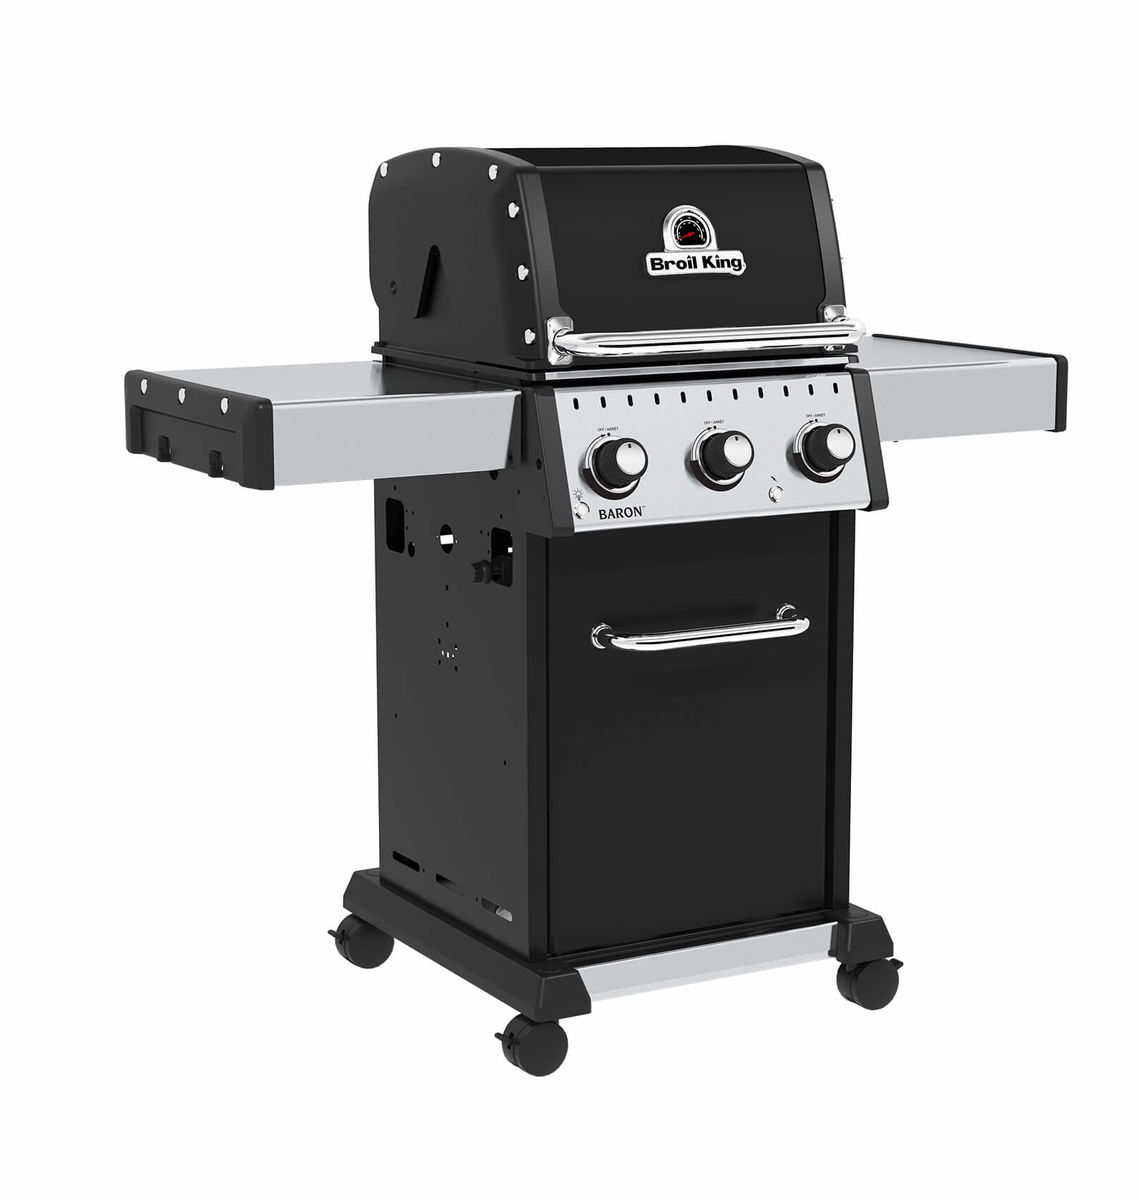 Image of Broil King Baron 320 Gasgrill bei nettoshop.ch